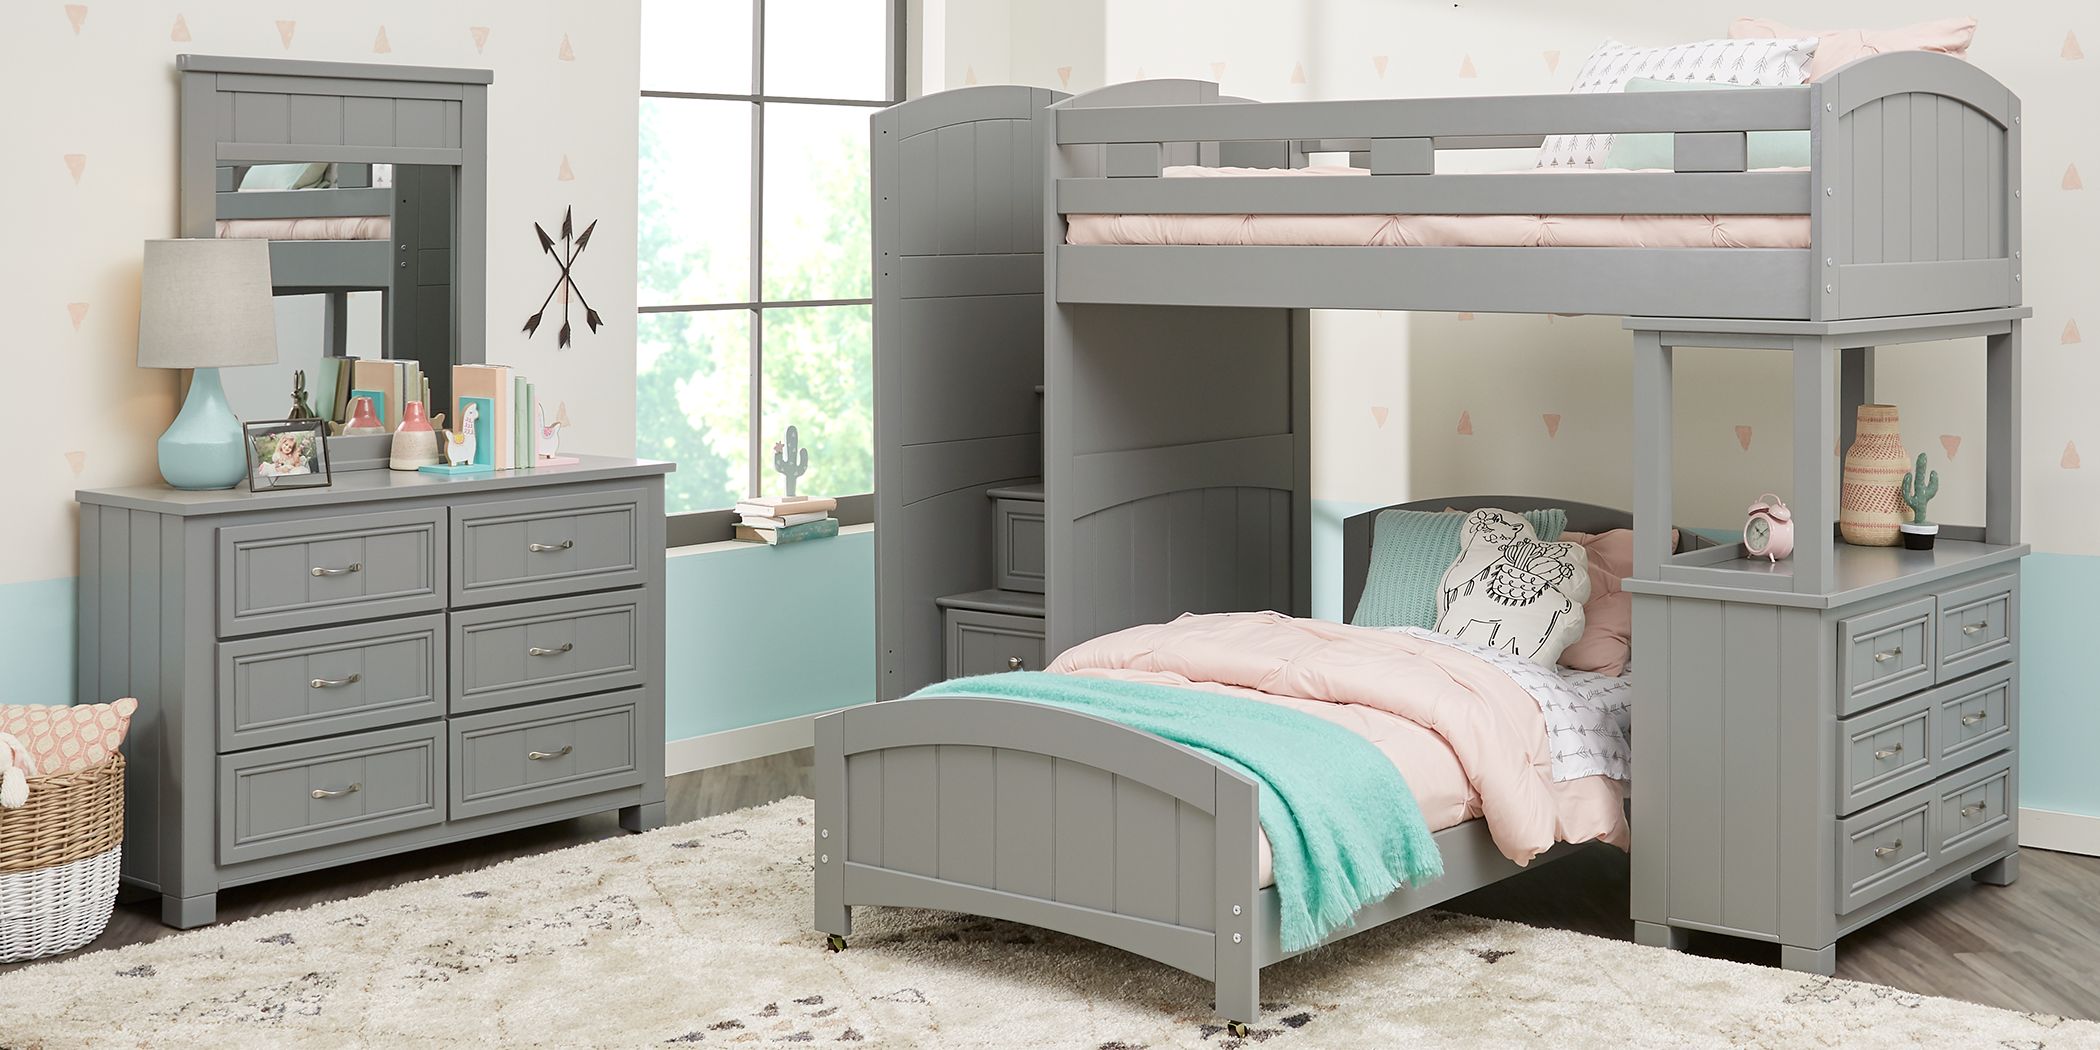 Bunk Beds With Dresser, Bunk Bed With Dresser